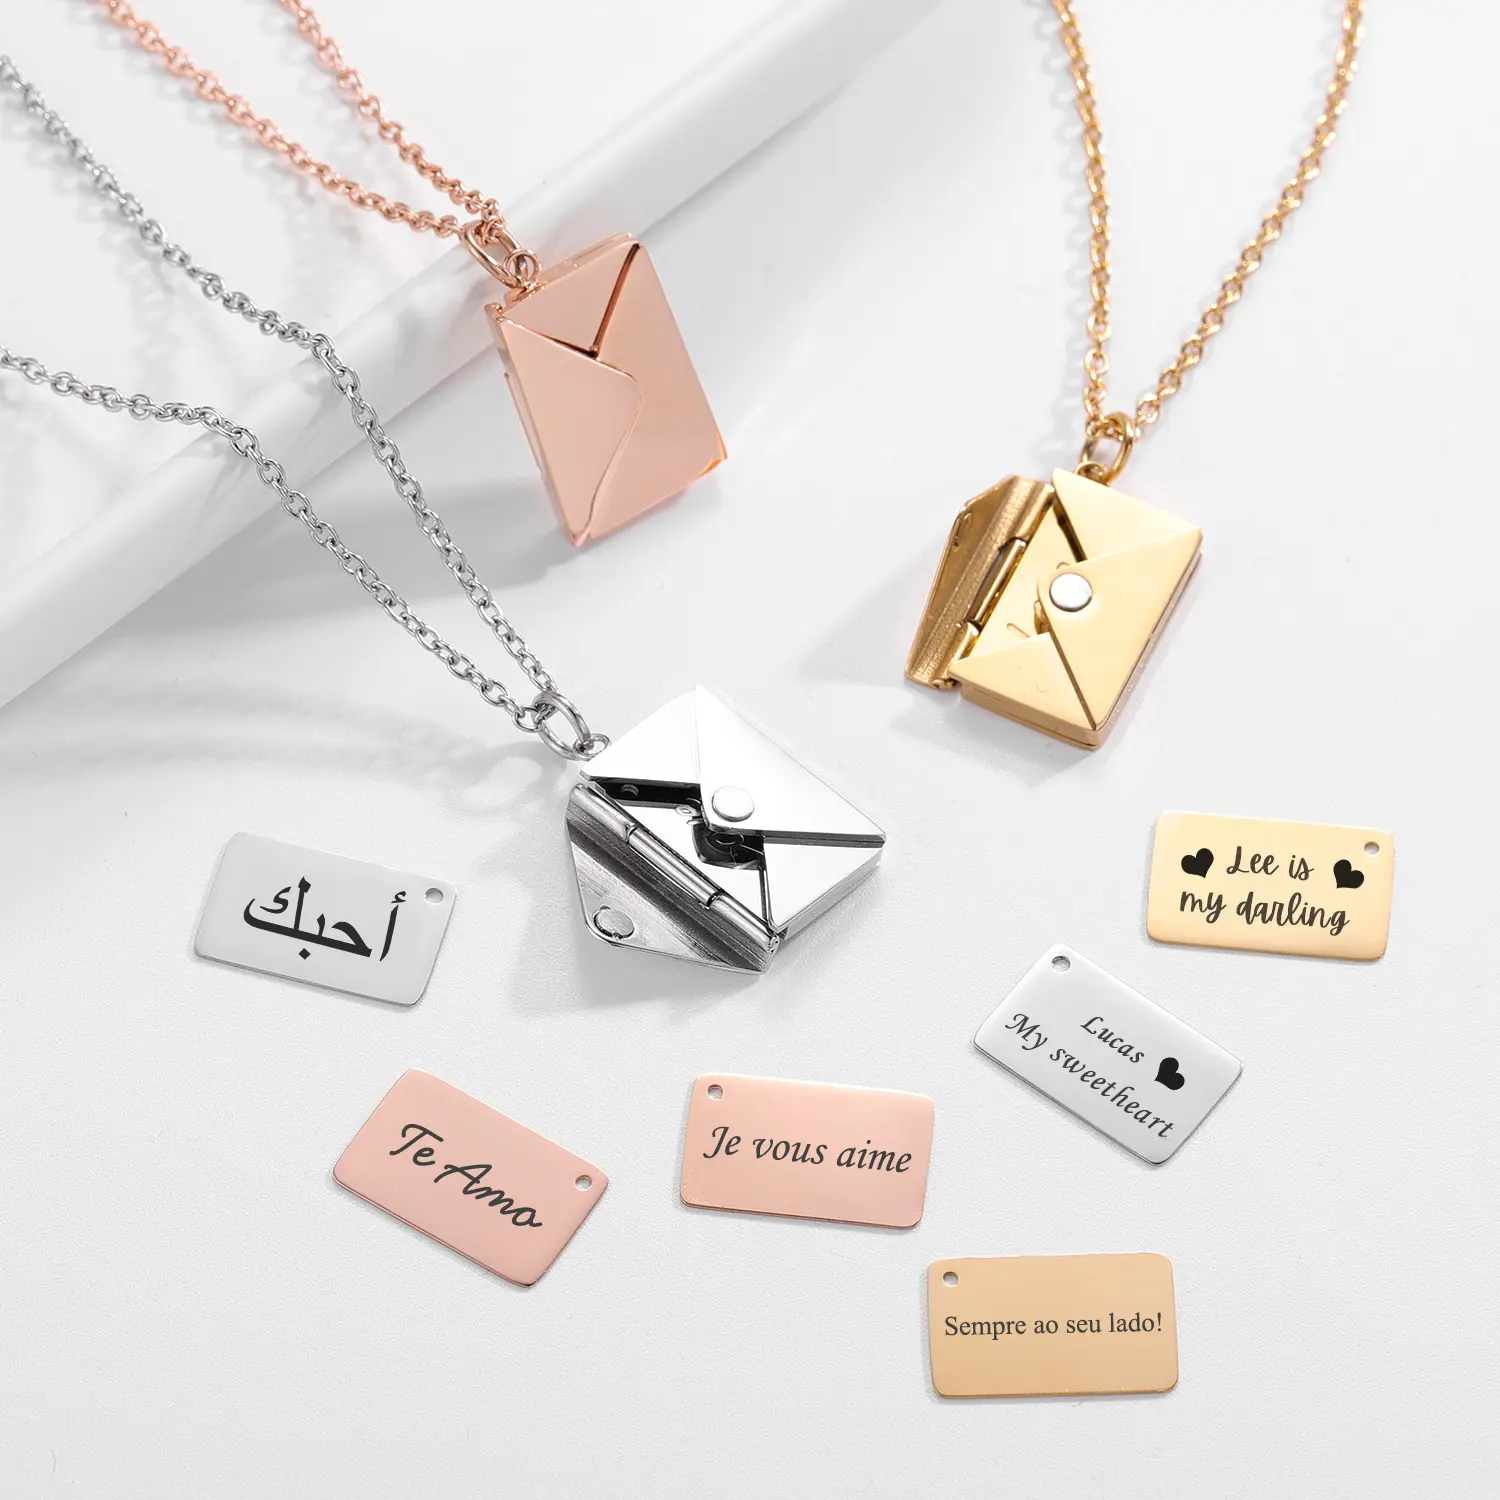 Romantic Gold Fashion Jewelry Self Love Letter Necklace Envelope Pendant Name Valentine's Day Mother's Day Small Gift jewelry